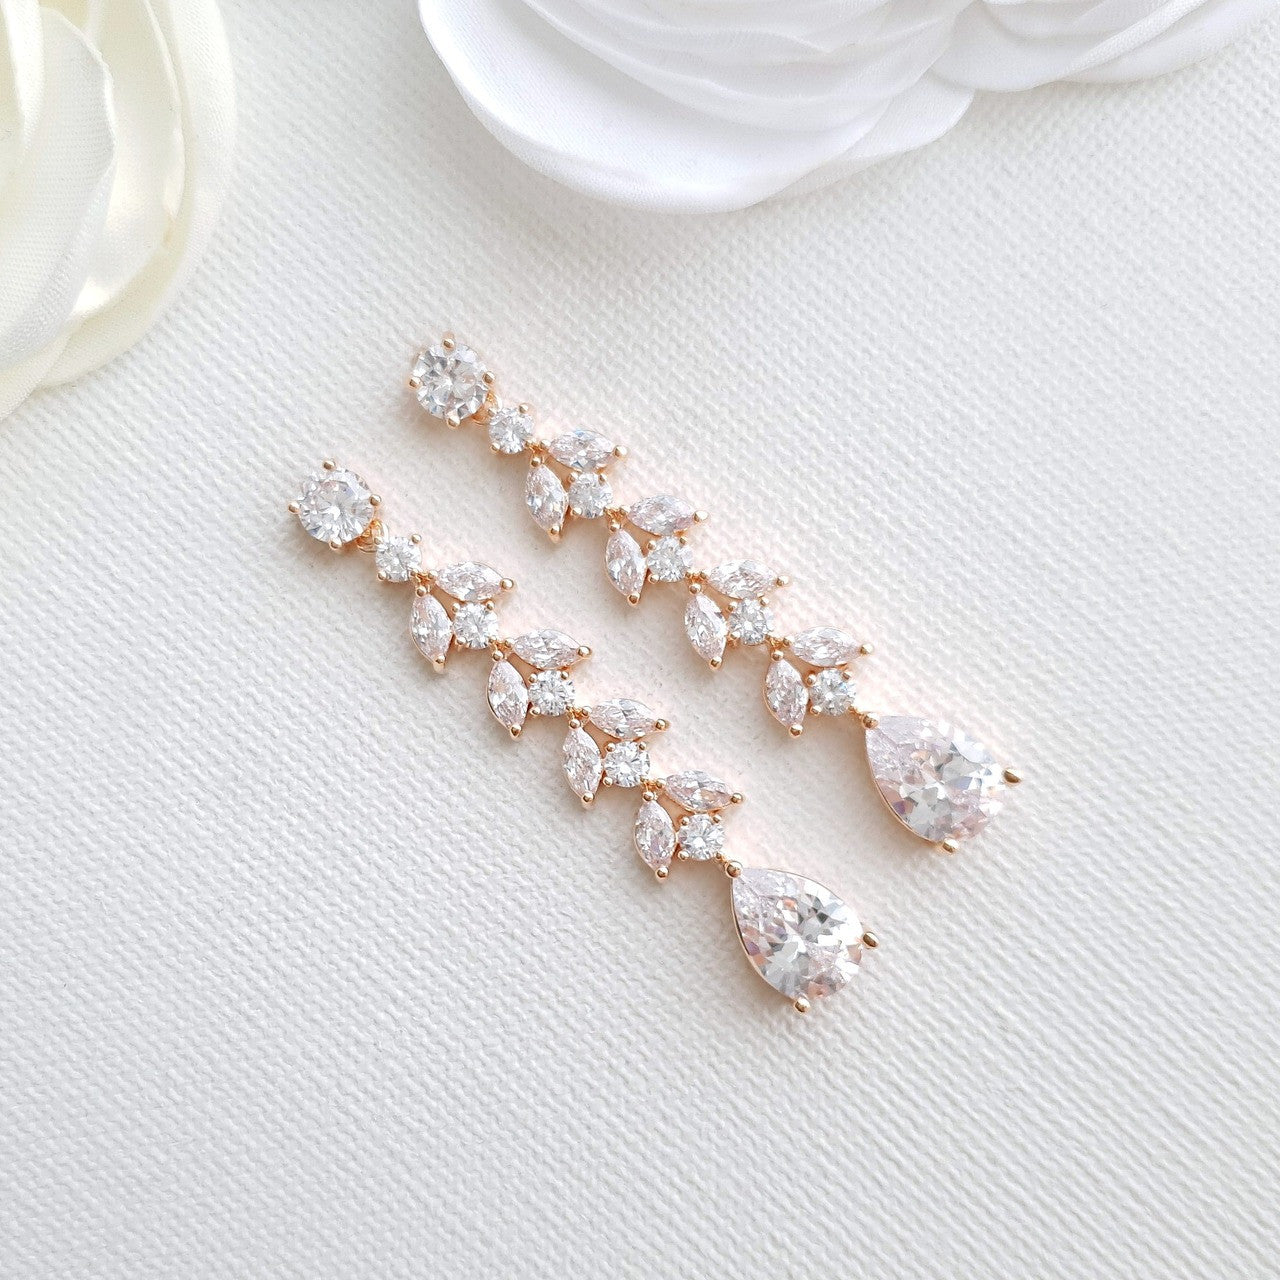 Marquise Crystal Earrings in Gold- Kira